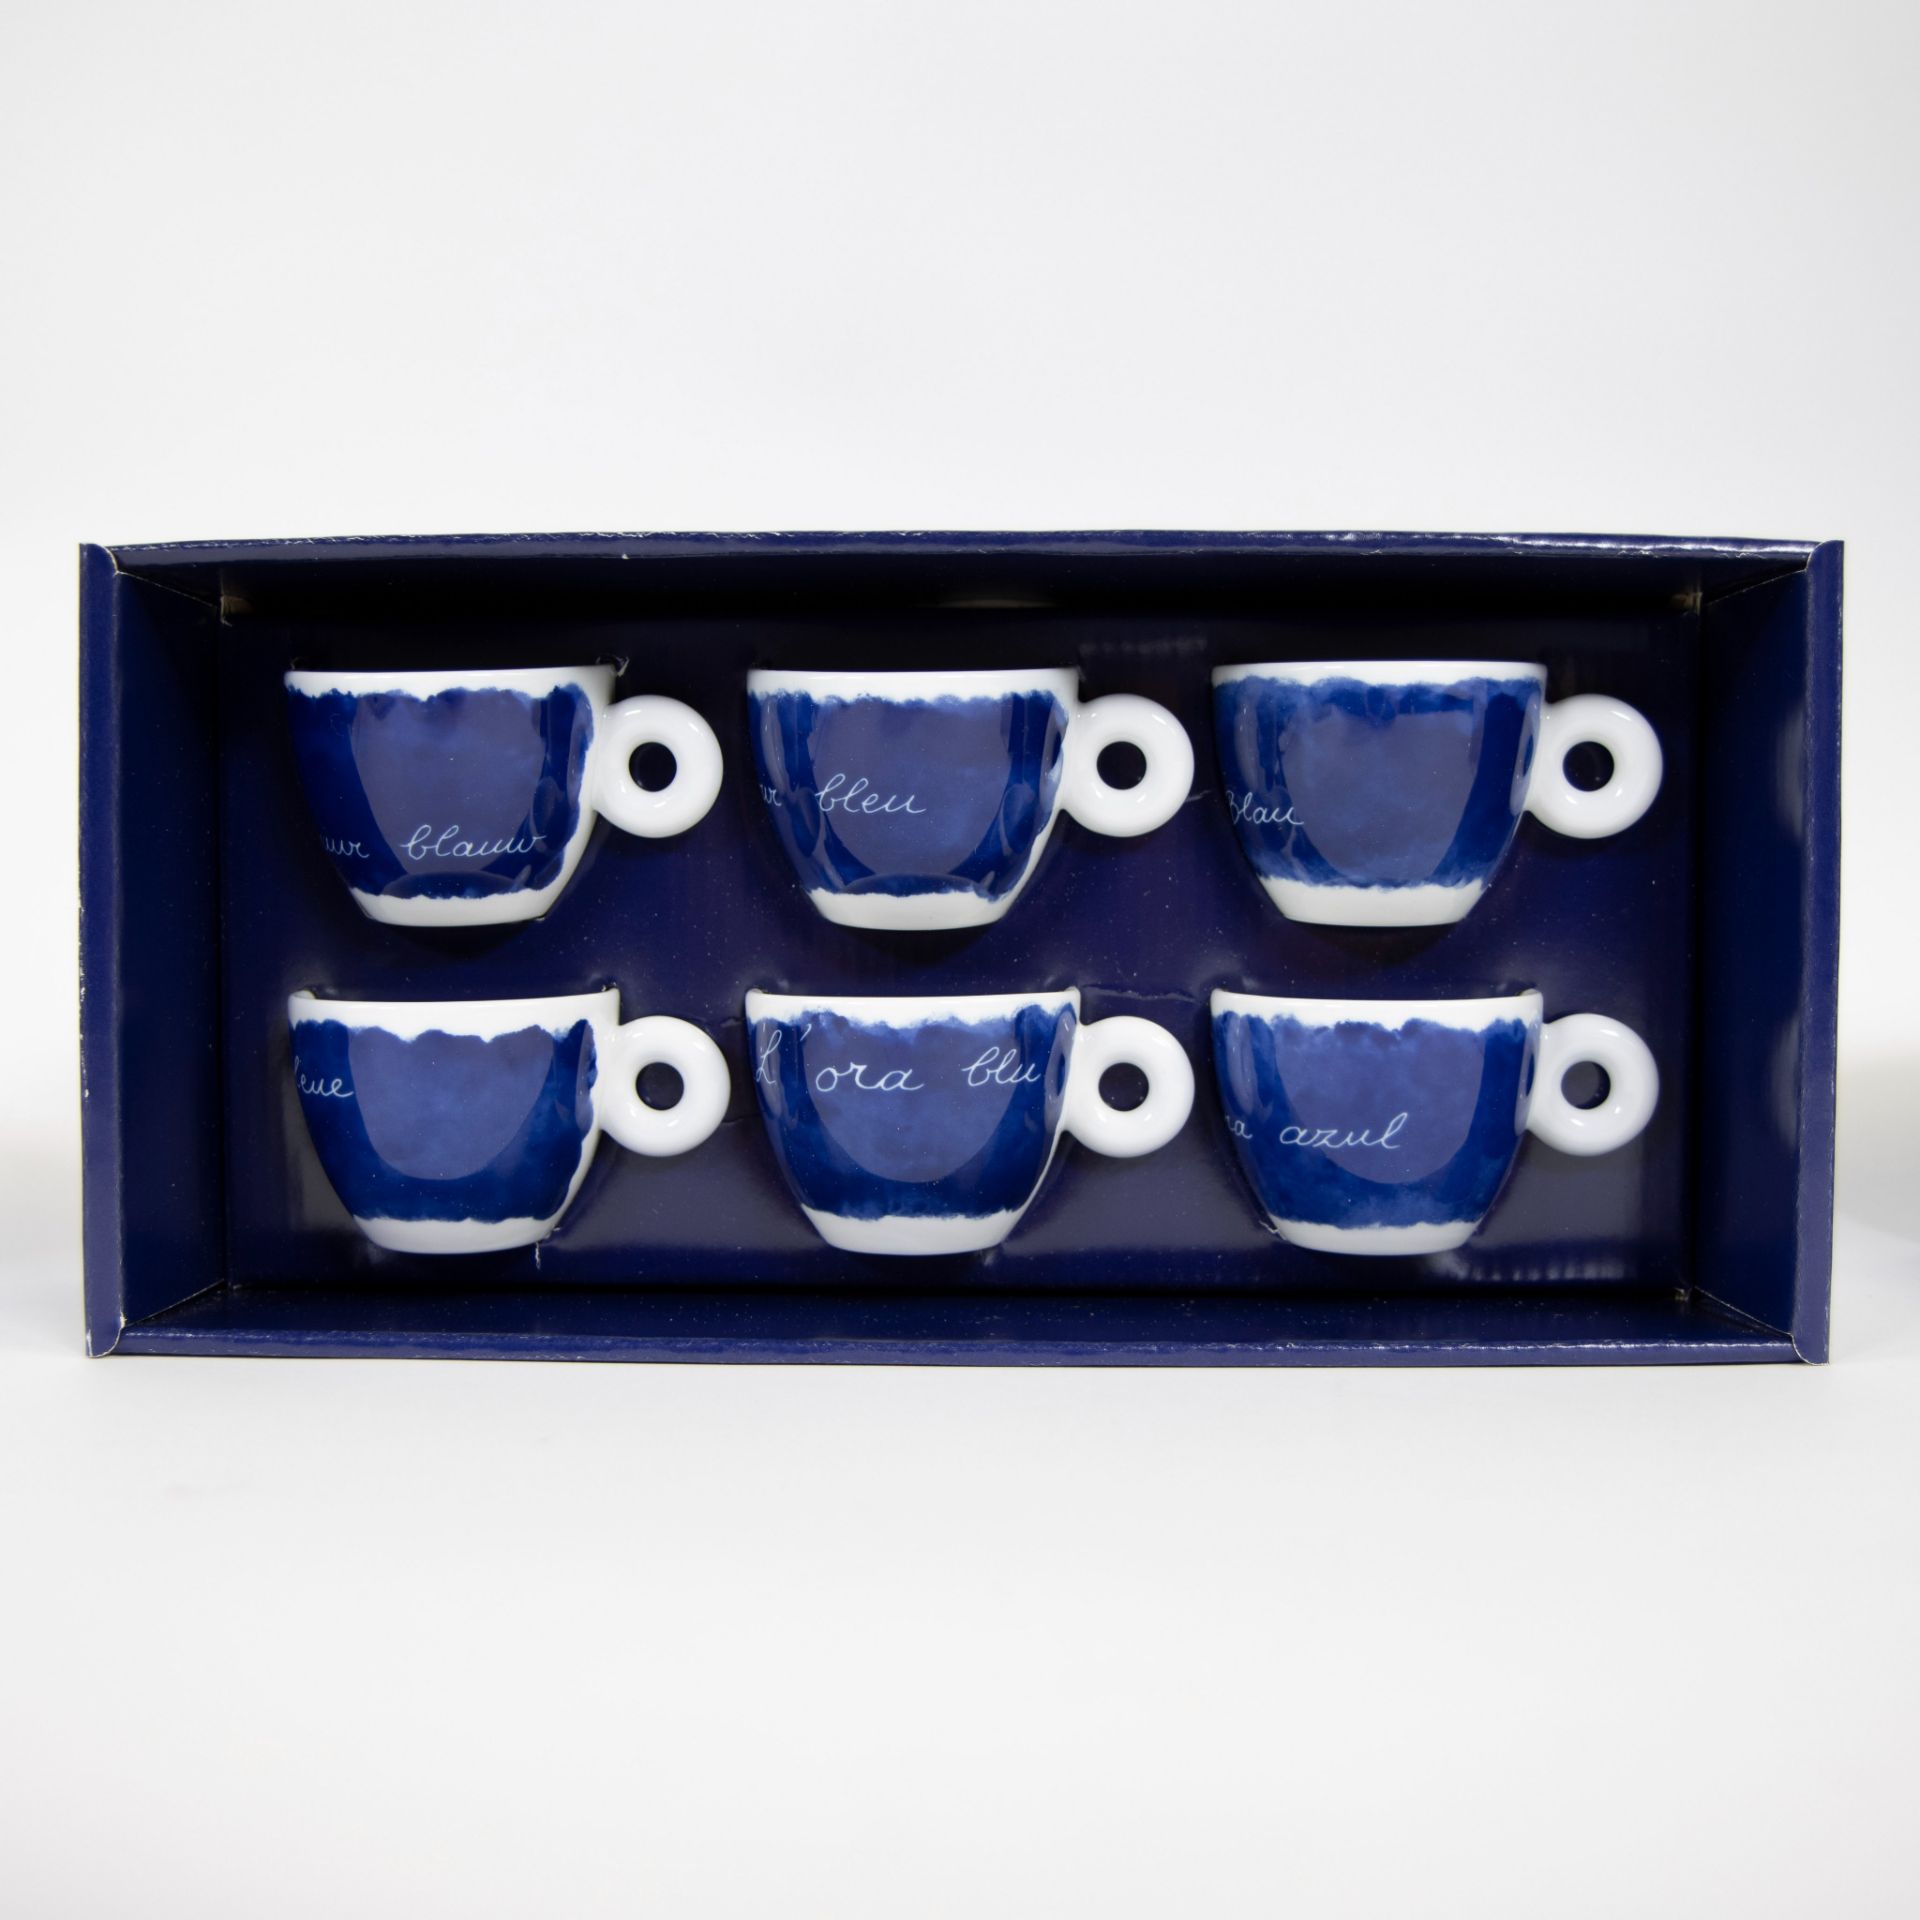 Jan Fabre illy collection Rosenthal (2006), 6 numbered and signed expresso cups - Image 3 of 5